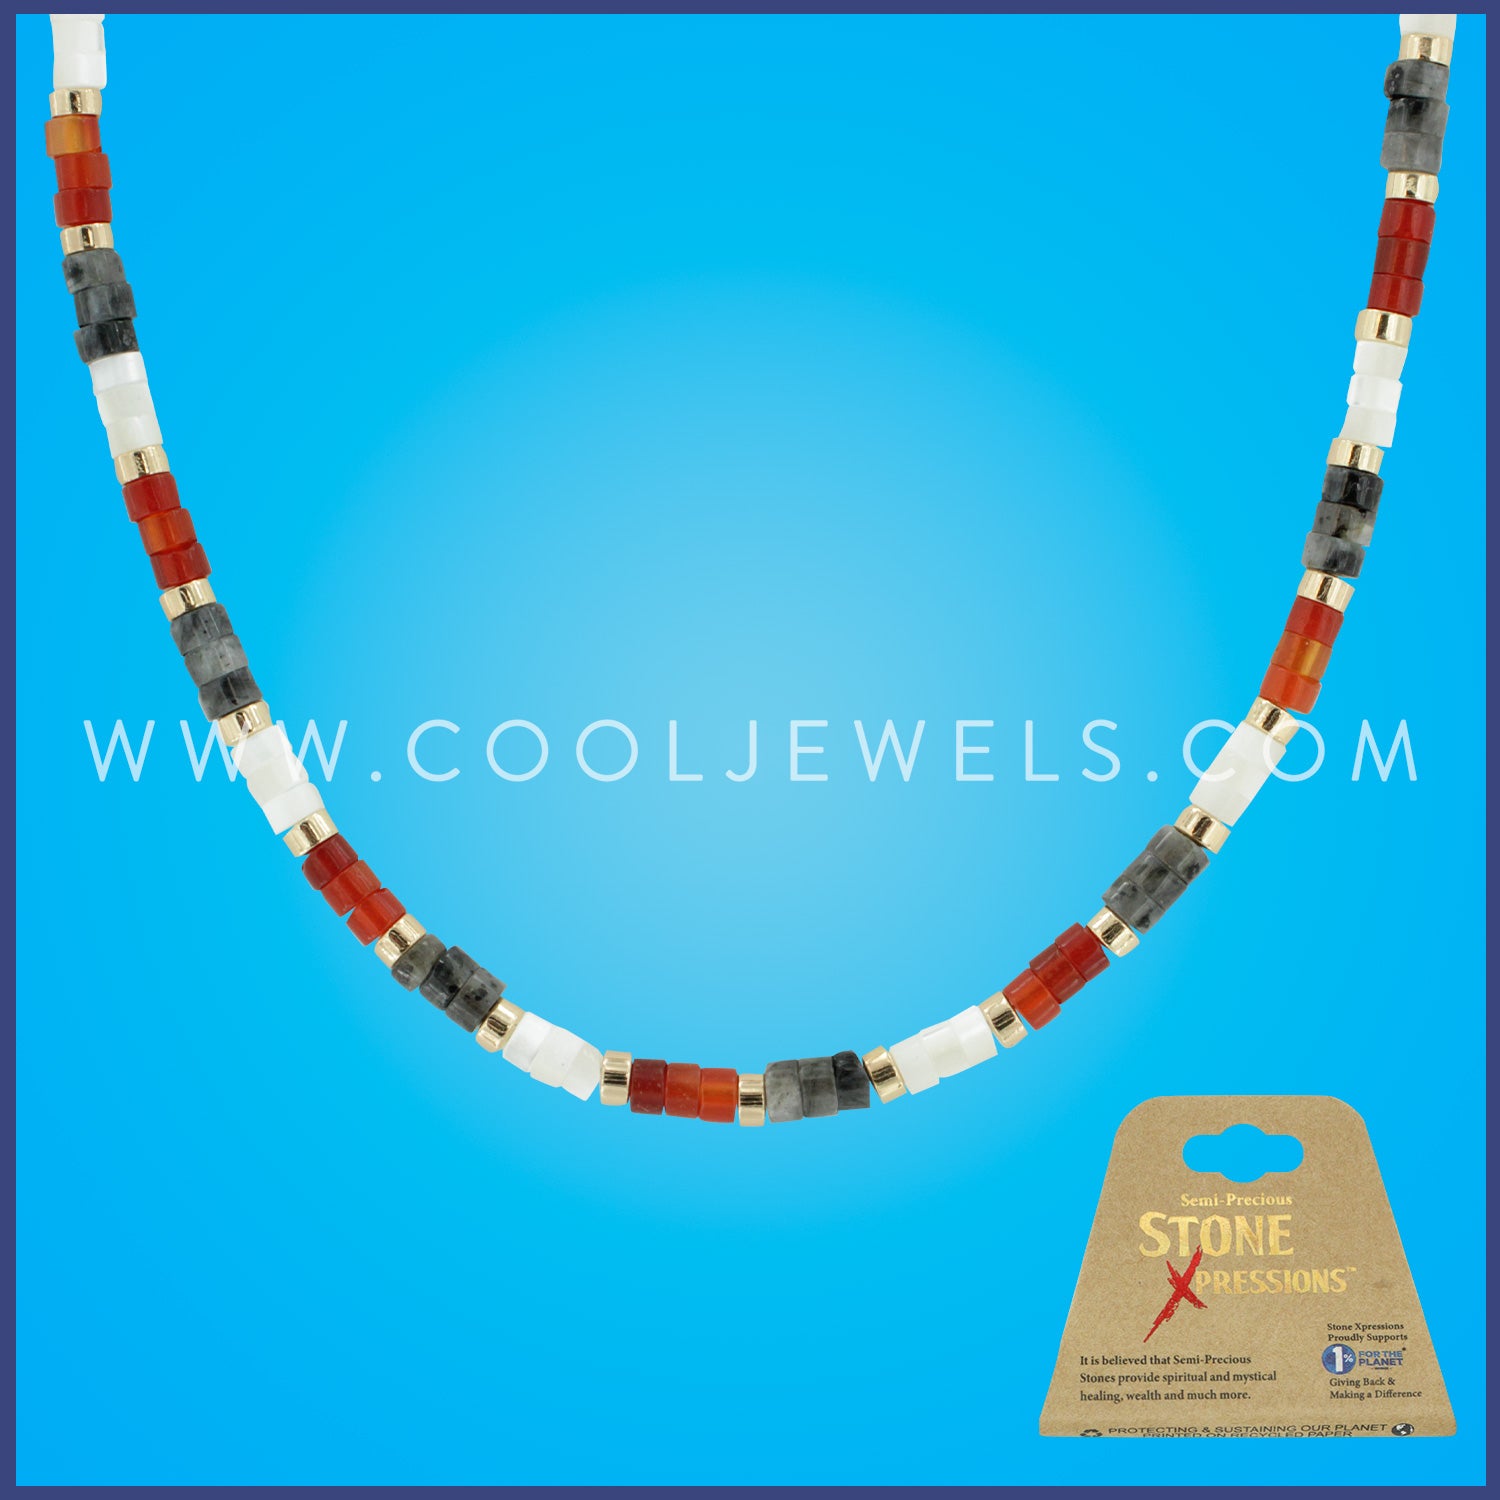 LINK CHAIN NECKLACE WITH STONE SLICES ASSORTED - CARDED